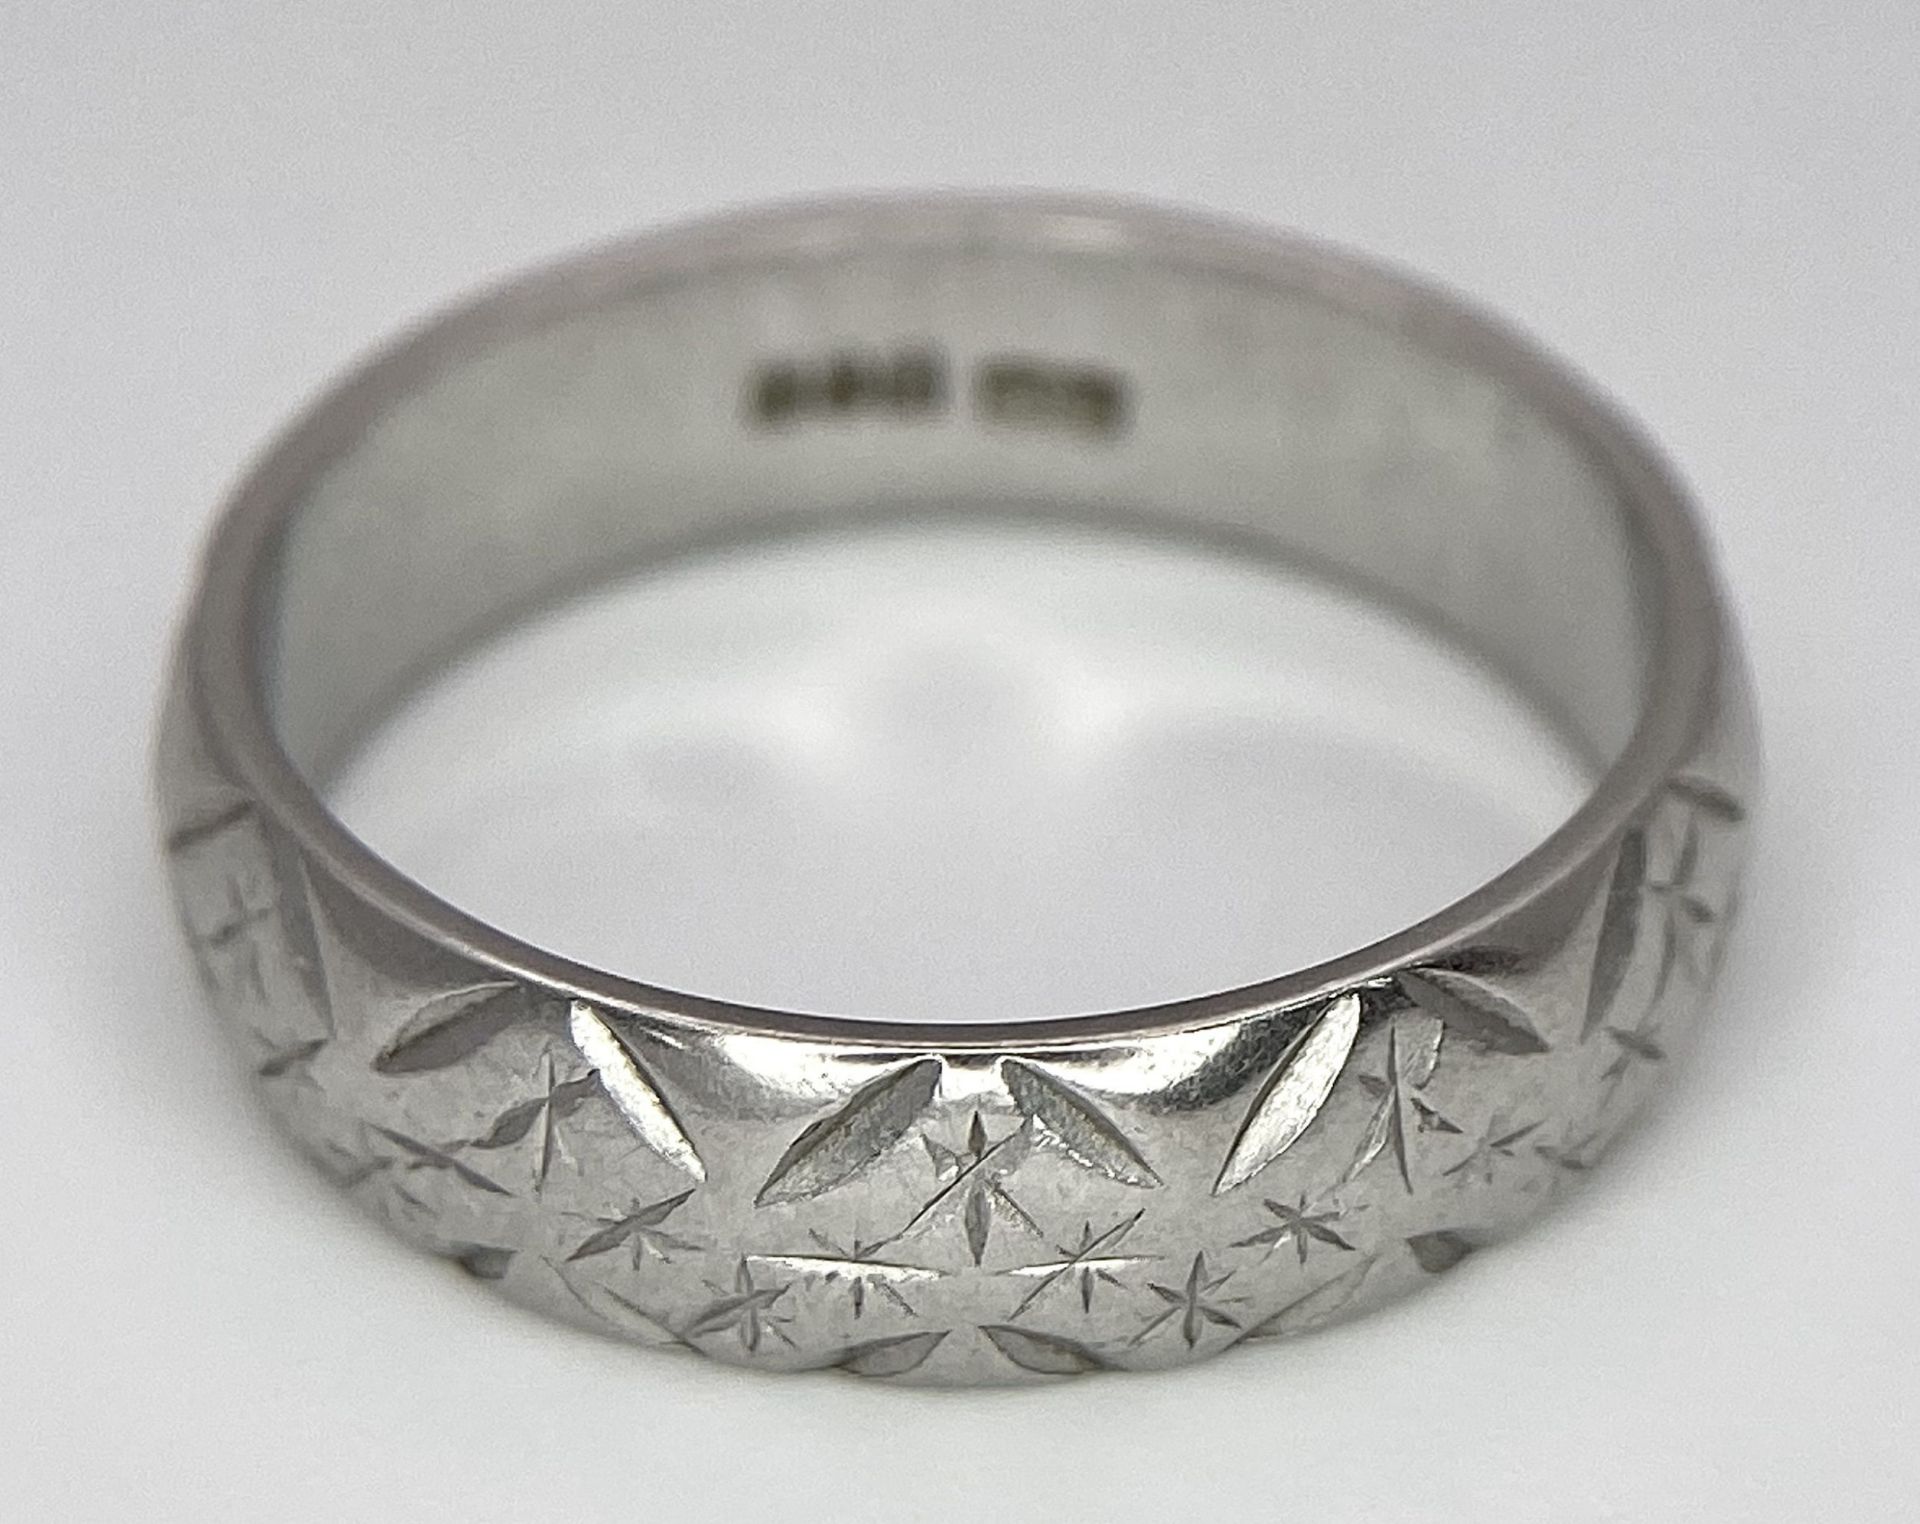 A Vintage Platinum Band Ring with Geometric Decorative Pattern. 5mm width. Size P. 7.5g - Image 4 of 6